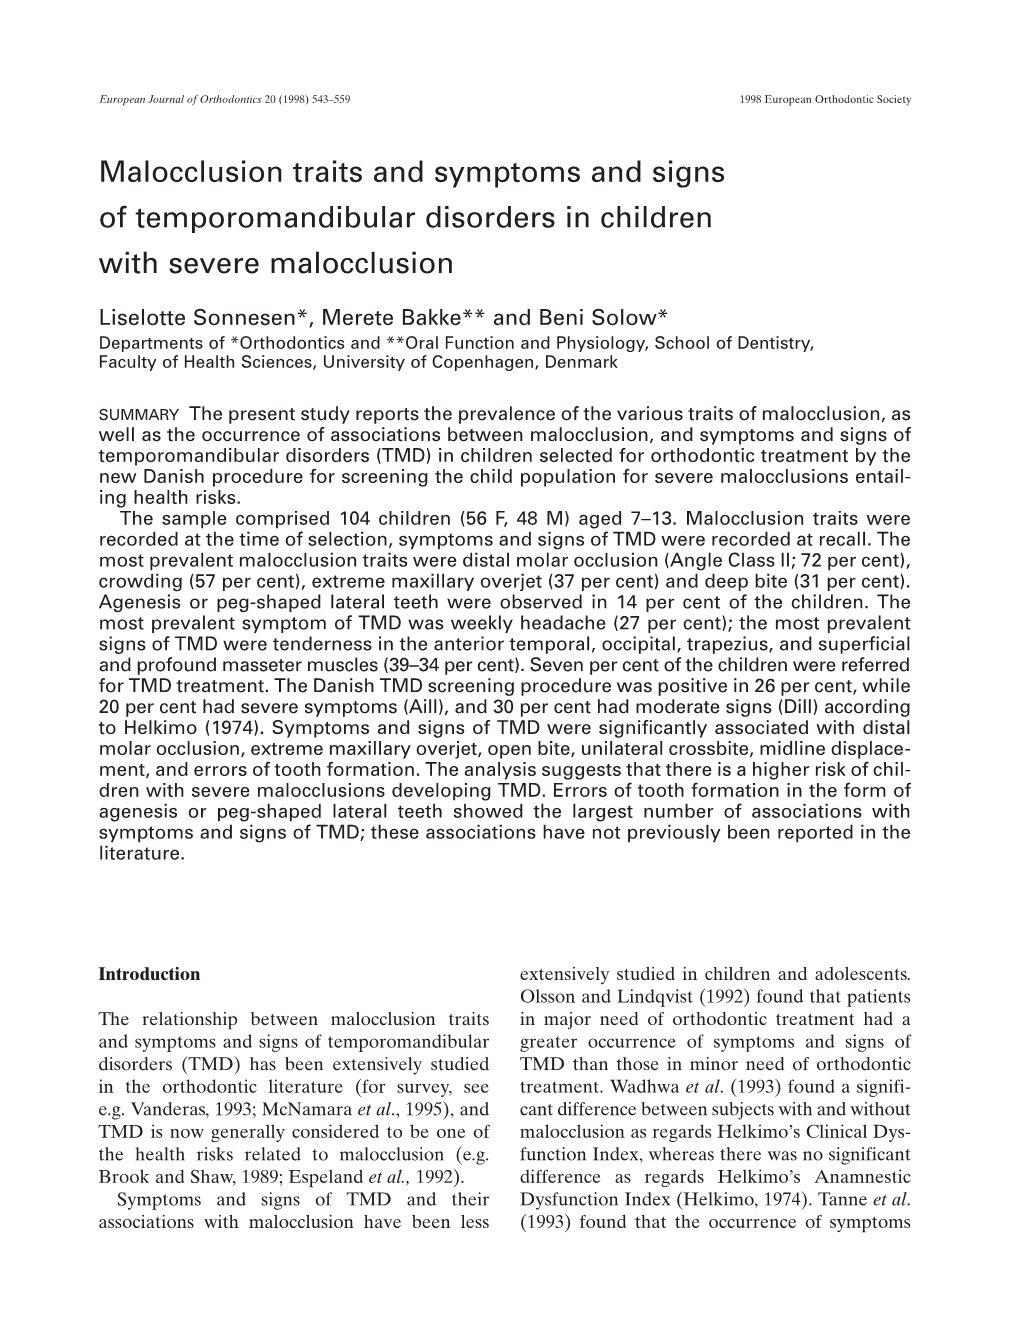 Malocclusion Traits and Symptoms and Signs of Temporomandibular Disorders in Children with Severe Malocclusion